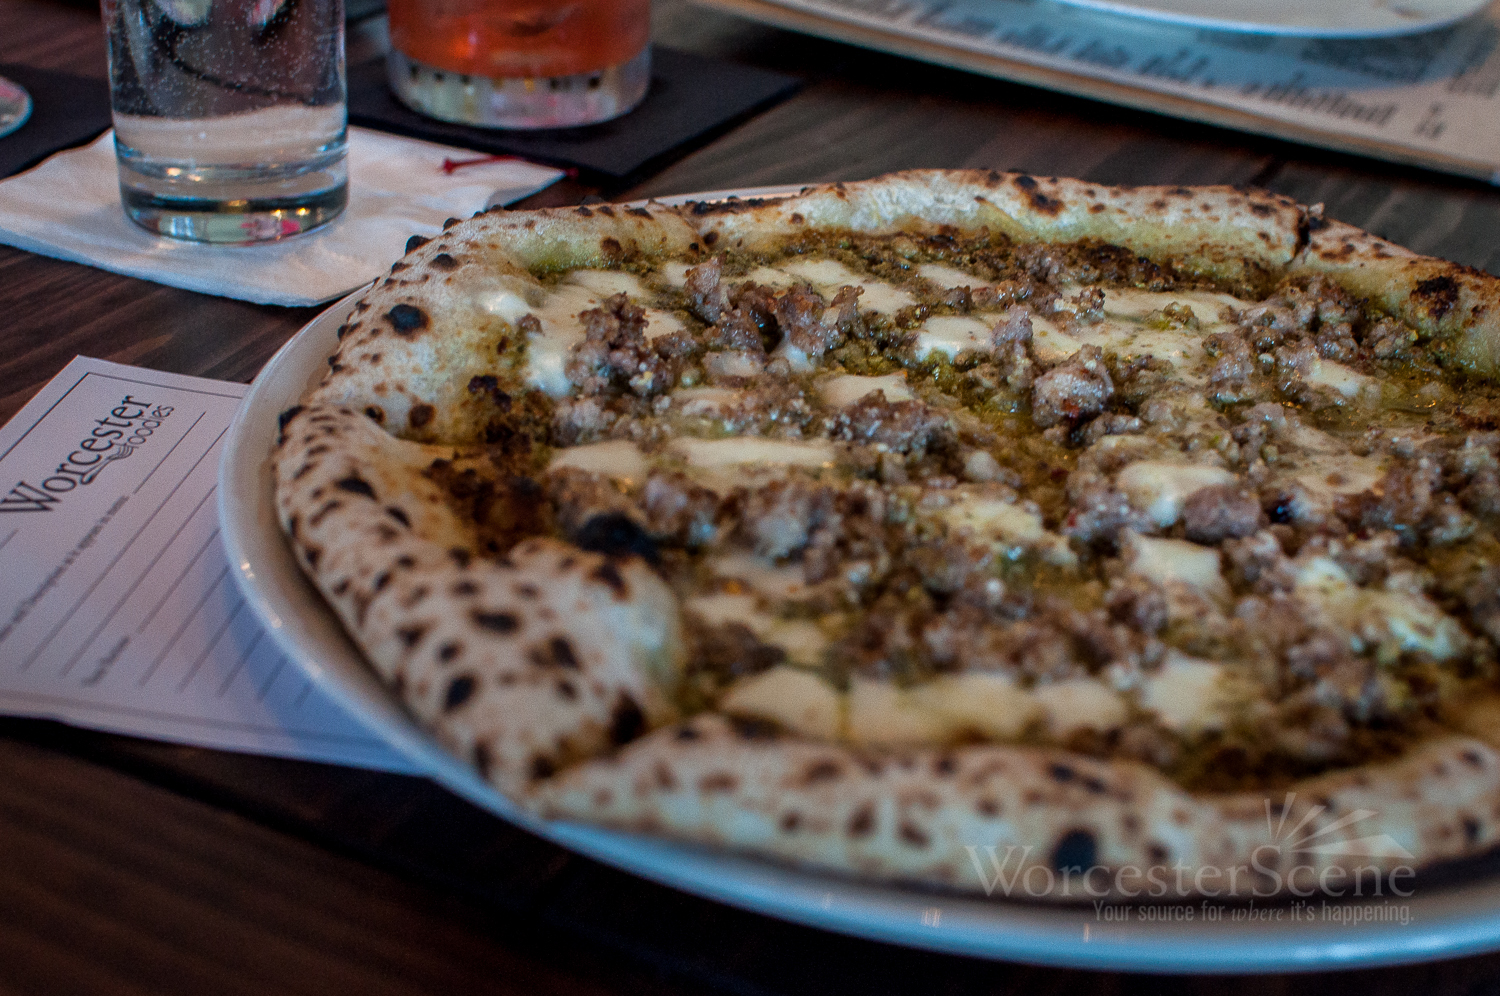 Pistachio Pizza from Volturno Pizza on Shrewsbury Street in Worcester, MA